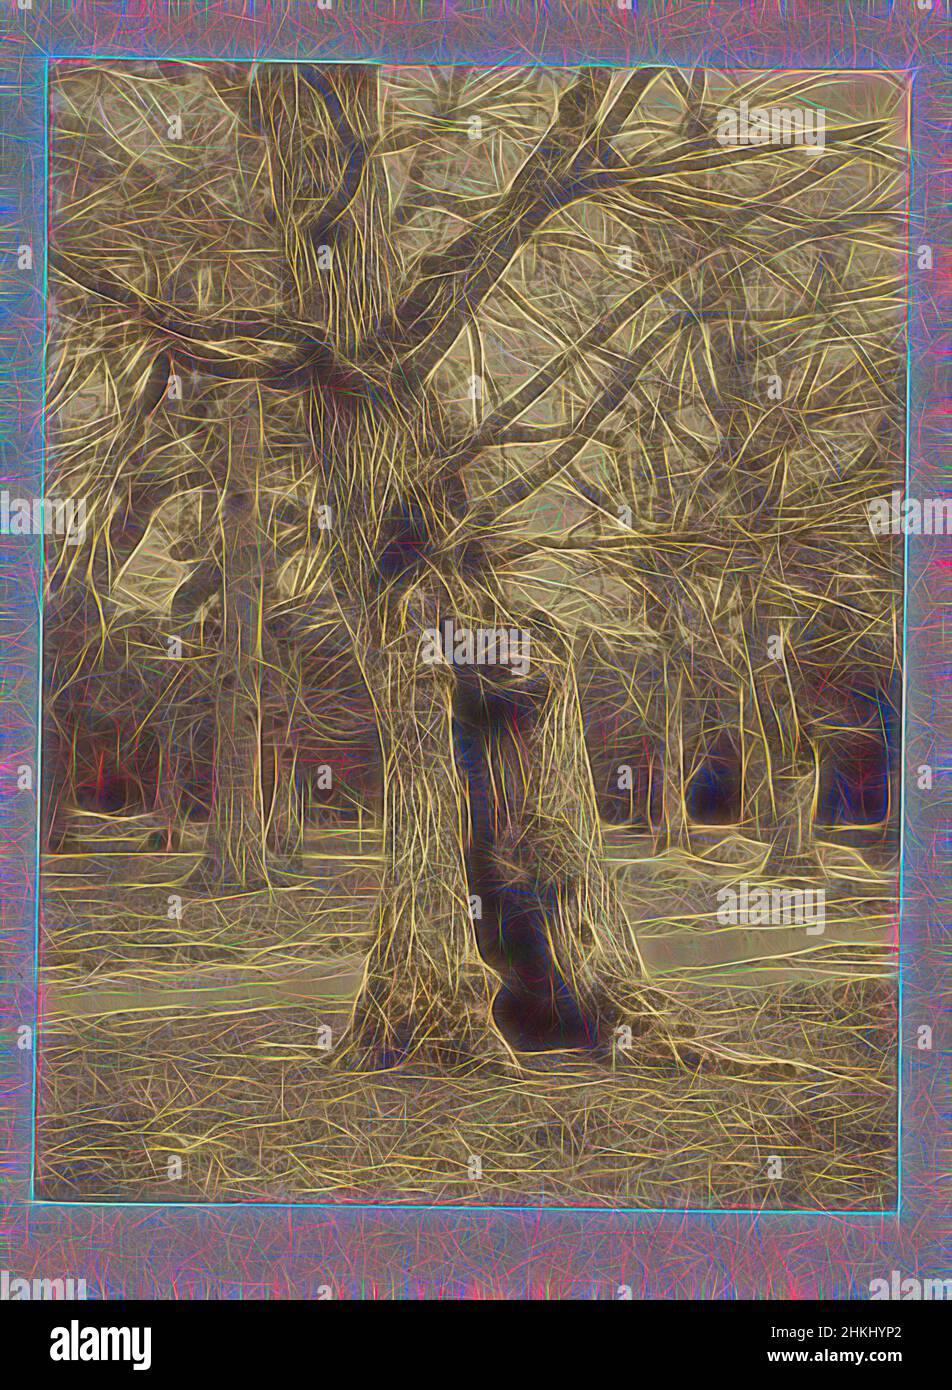 Inspired by tree, c. 1850 - c. 1870, albumen print, height 253 mm × width 191 mm, Reimagined by Artotop. Classic art reinvented with a modern twist. Design of warm cheerful glowing of brightness and light ray radiance. Photography inspired by surrealism and futurism, embracing dynamic energy of modern technology, movement, speed and revolutionize culture Stock Photo